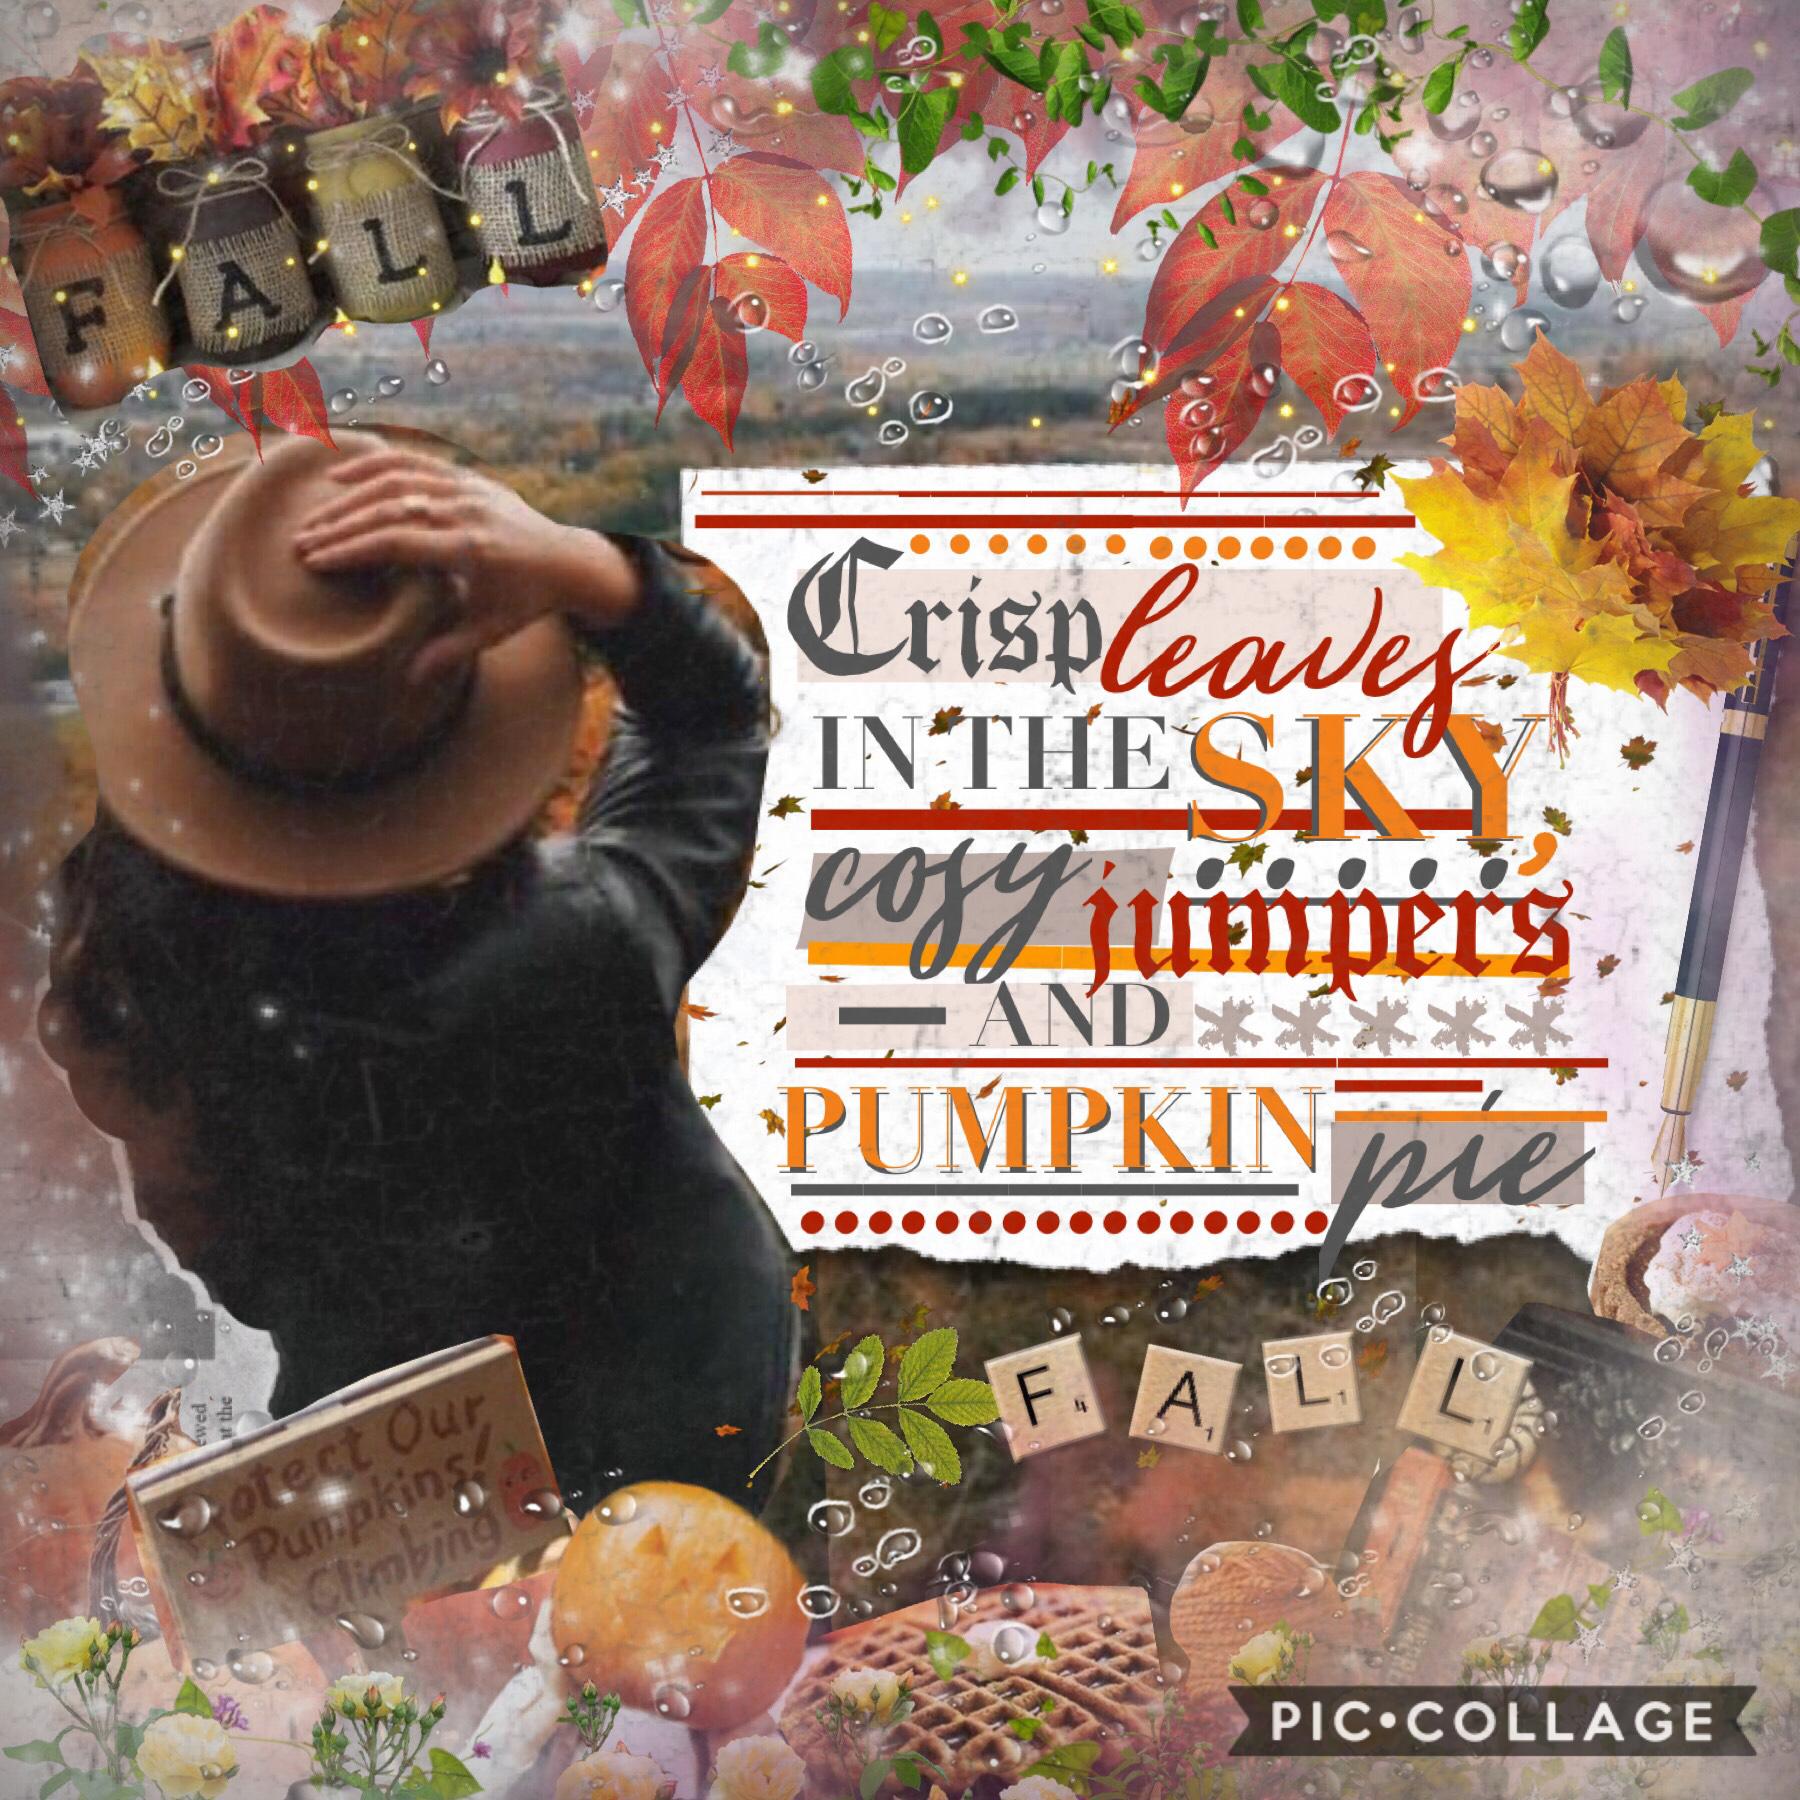 It's autumn!!🍁Autumn is just such an amazing season. I love being able to wear cozy jumpers and drink hot chocolate again 😂☺️🍁Entry for trackandfieldlife's contest. ✨Sorry for the inactivity school has been such a whirlwind this half term. Glad to be off 